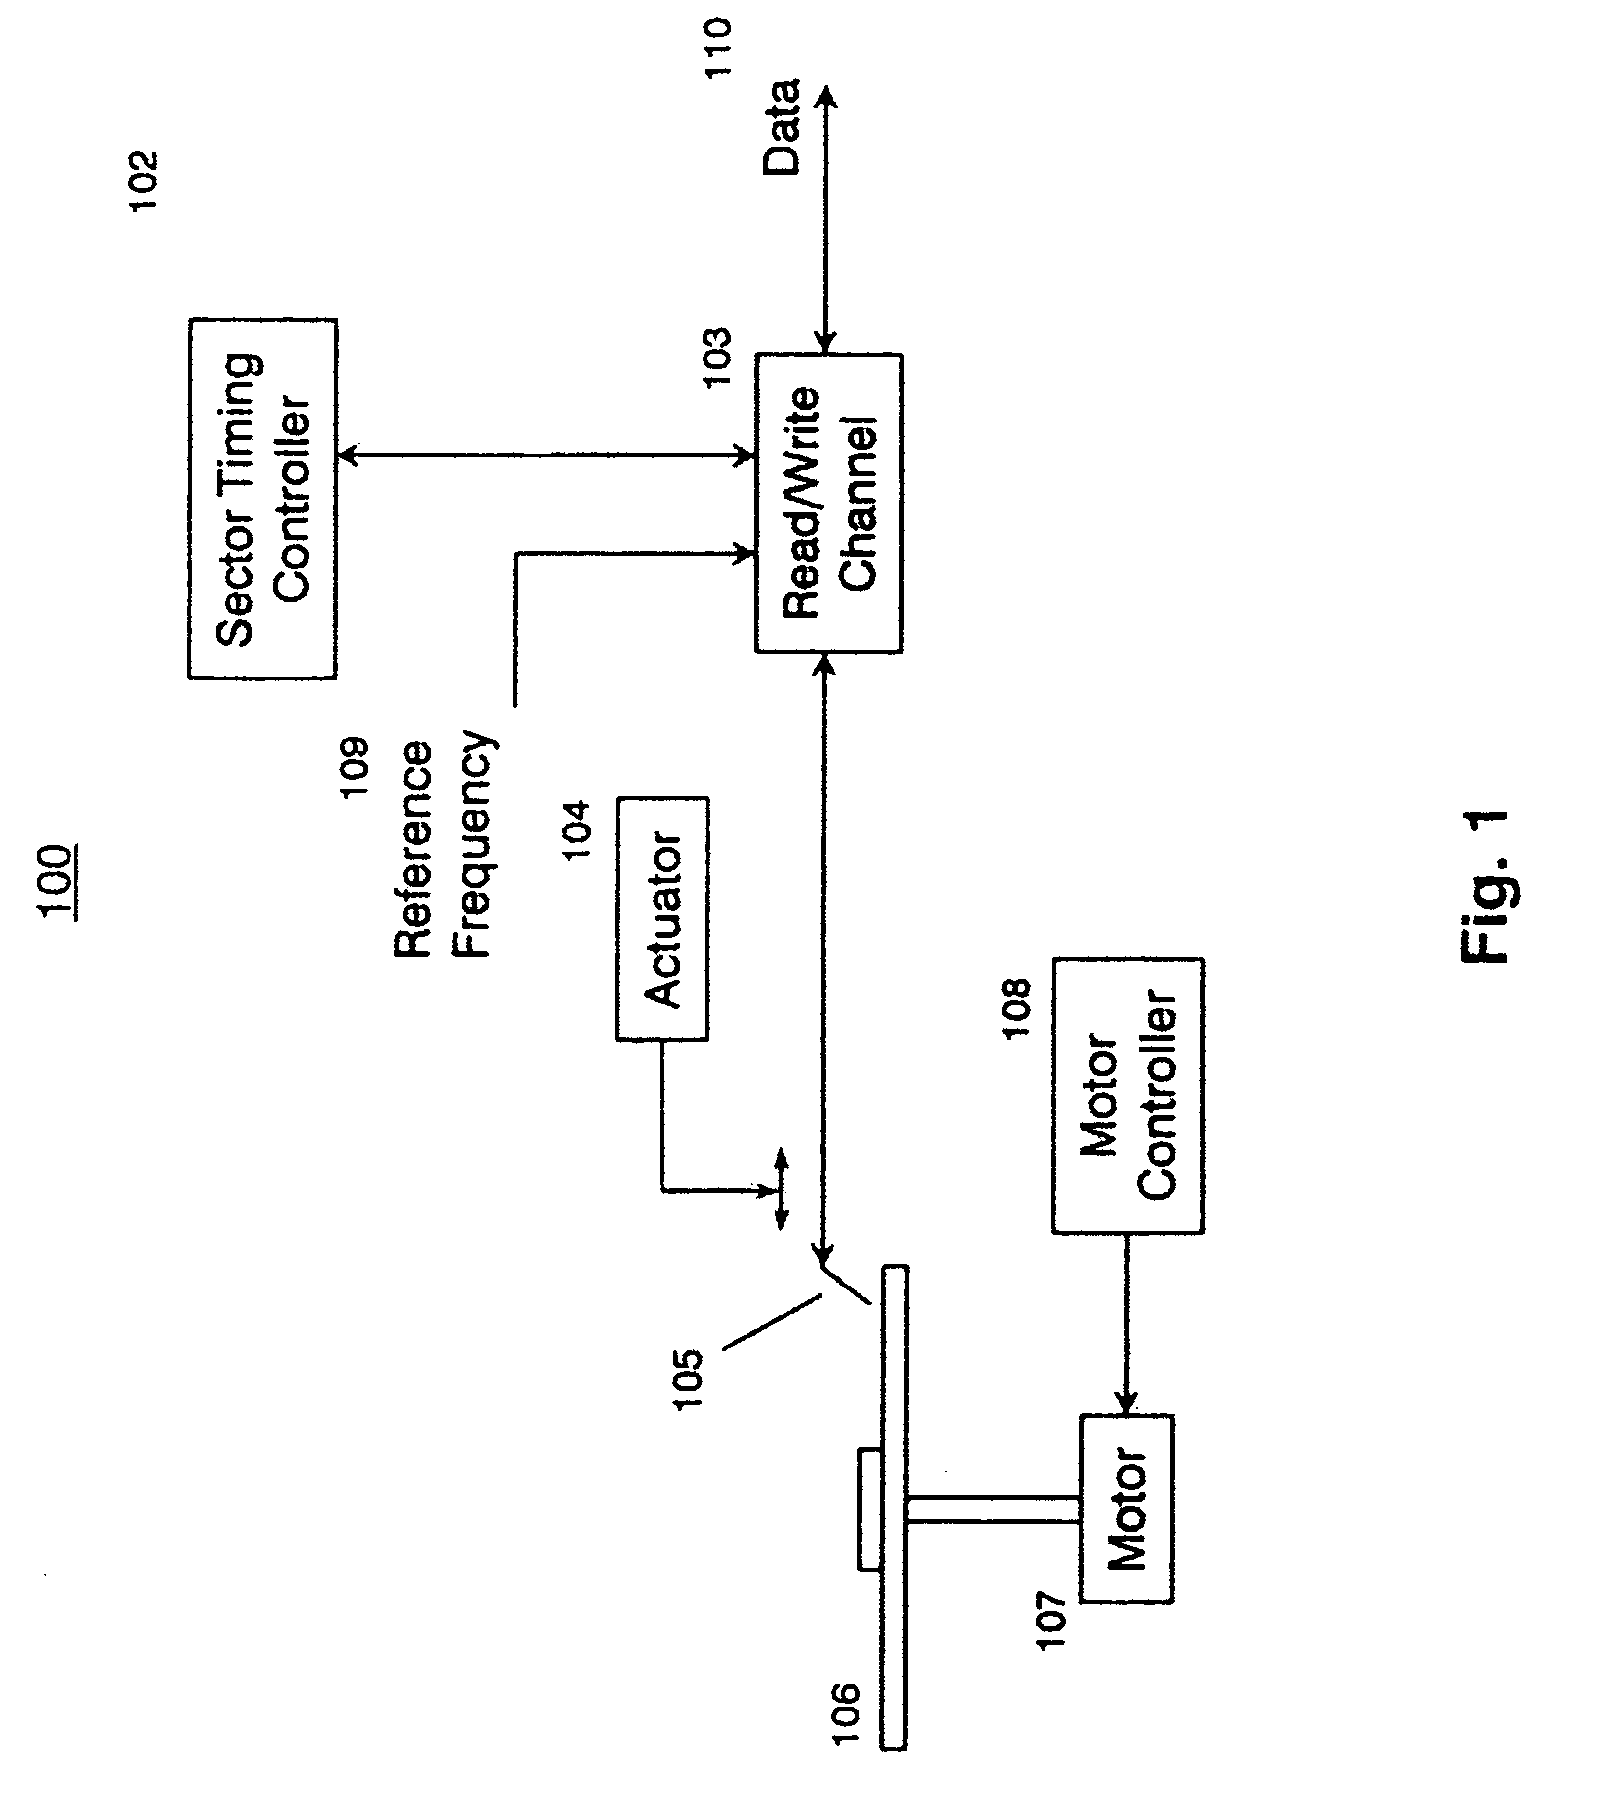 DC-offset compensation loops for magnetic recording system